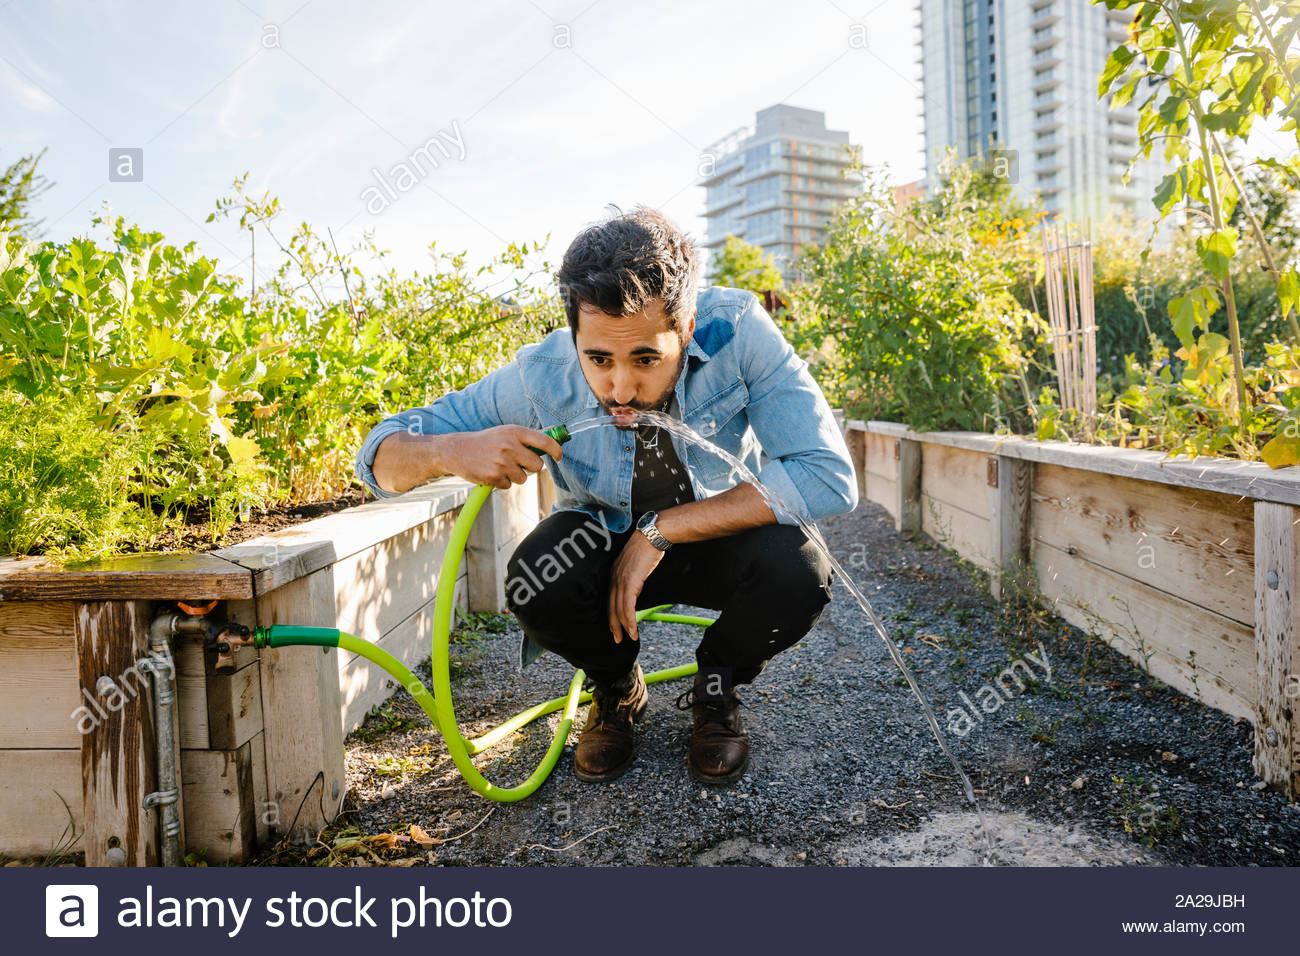 Young man drinking from hose in sunny, urban community garden Stock Photo